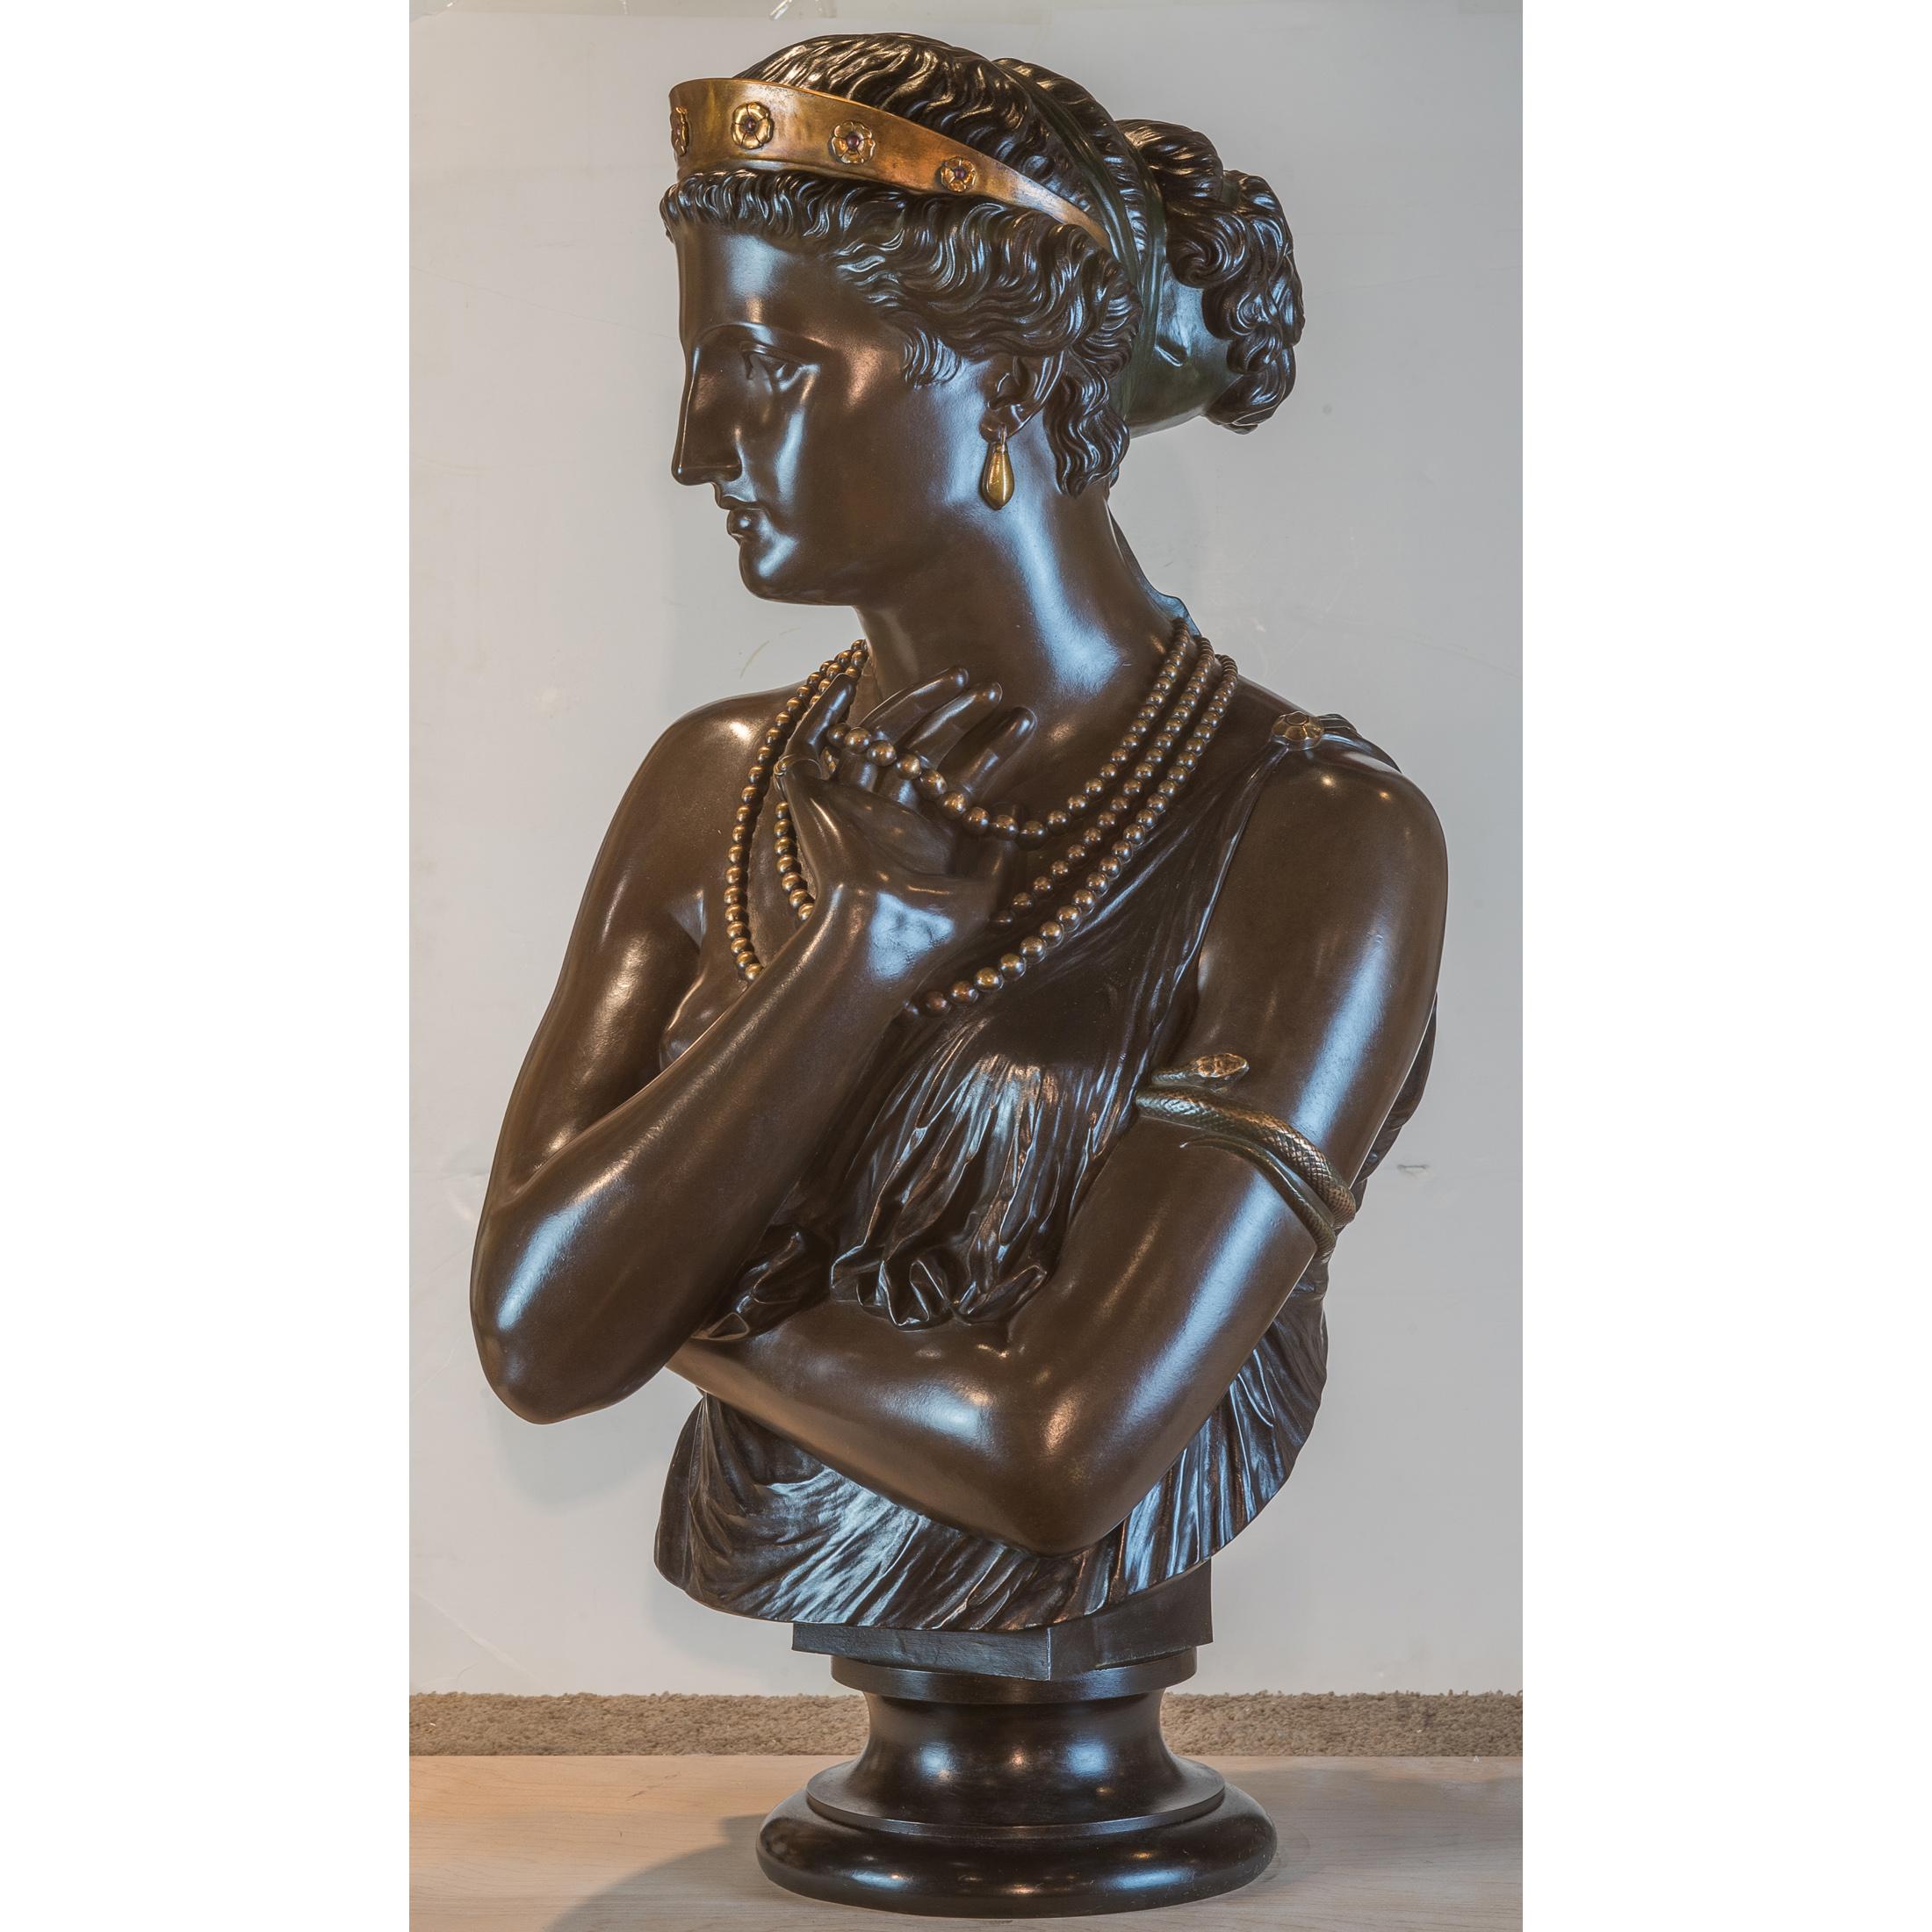 A Fine Patinated Bronze Bust of Helen of Troy by Clésinger - Sculpture by Jean-Baptiste Clésinger